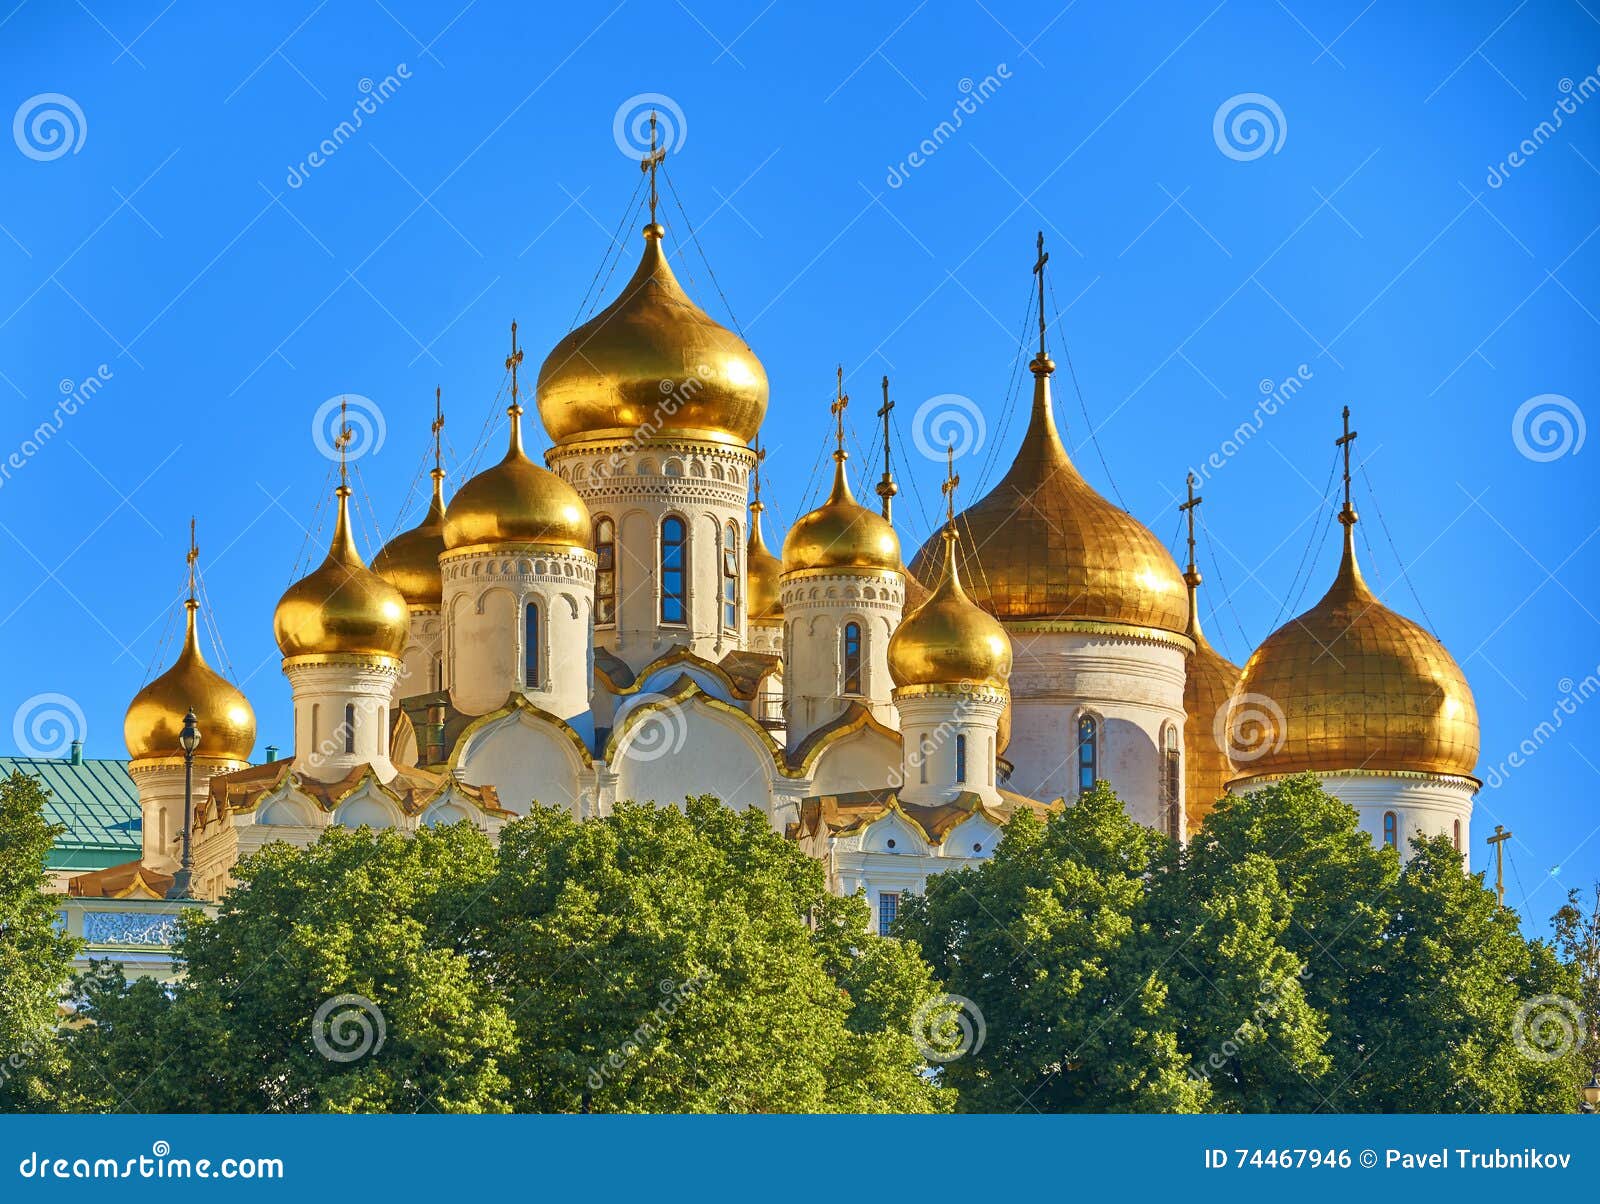 cathedrals in the kremlin